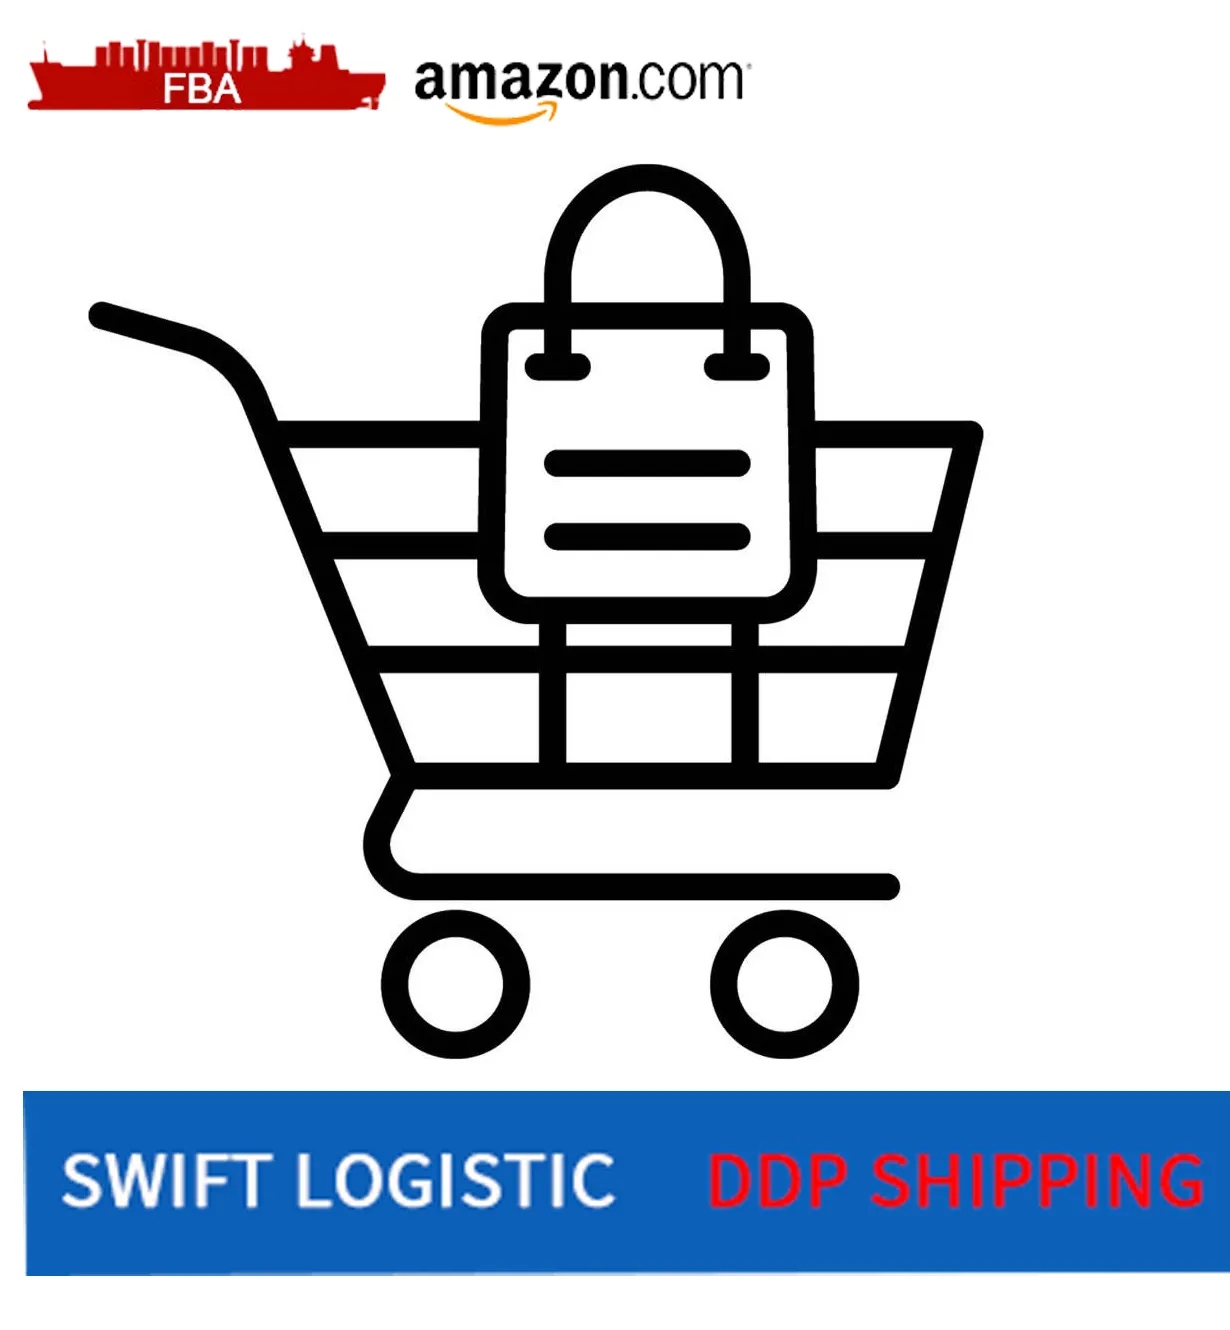 Reliable shipping Taobao online 1688 yiwu purchasing agent 1688 agent drop shippinglogistic company